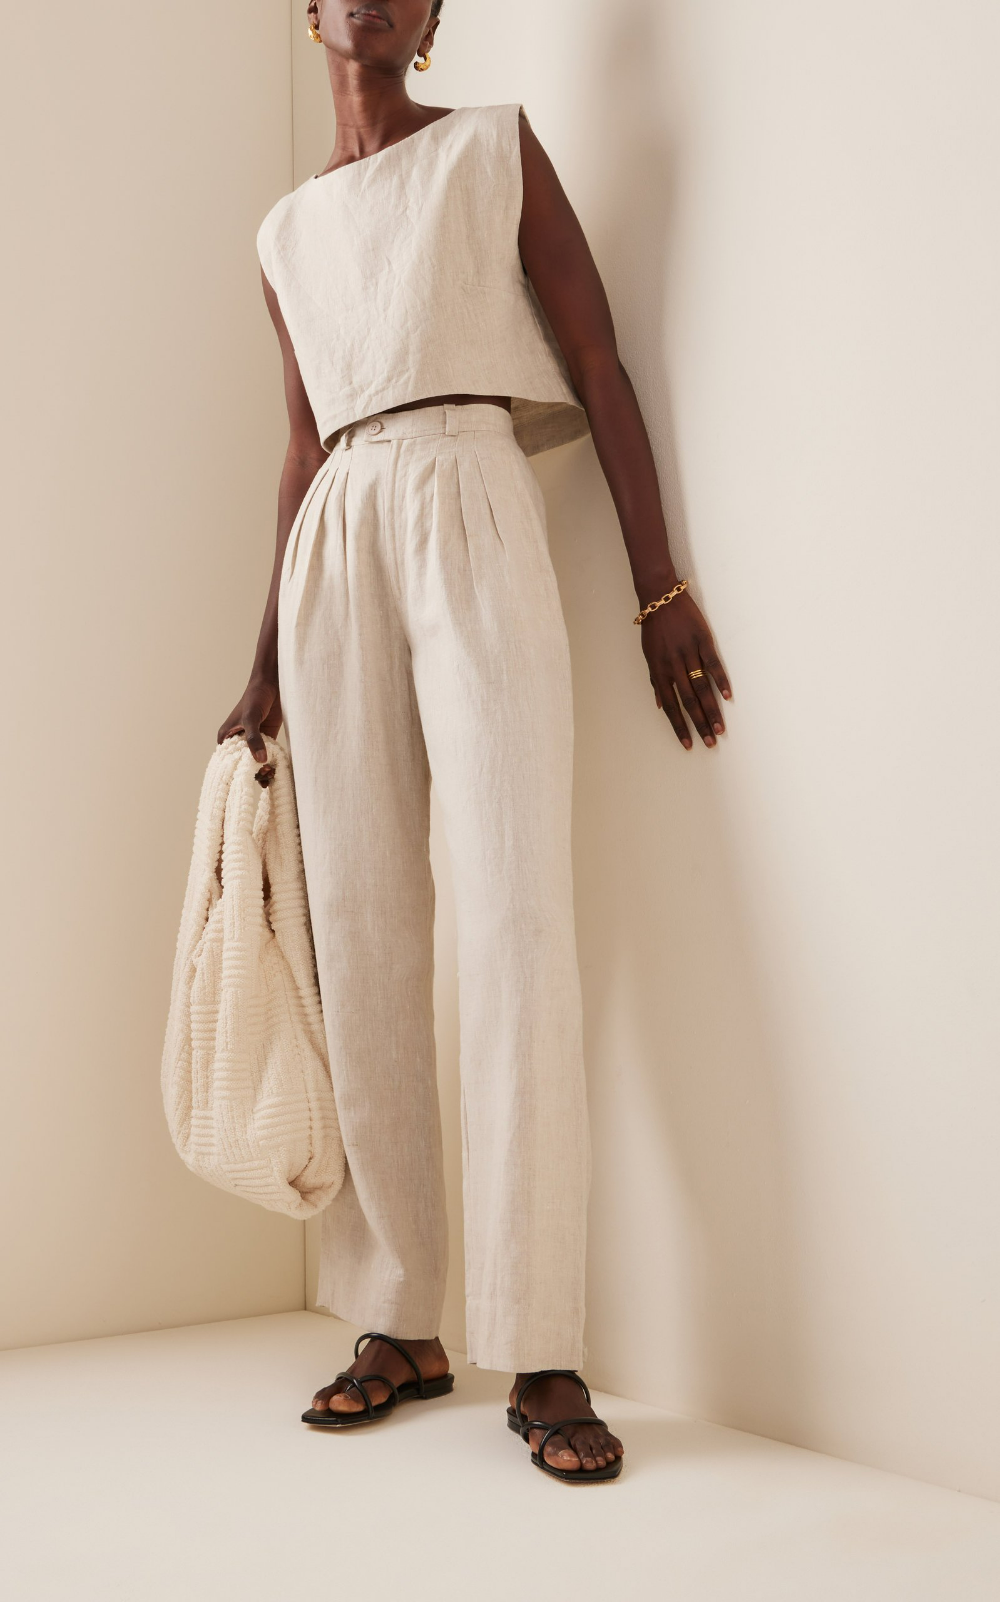 Stay Cool and Stylish with Linen Trousers for Every Occasion